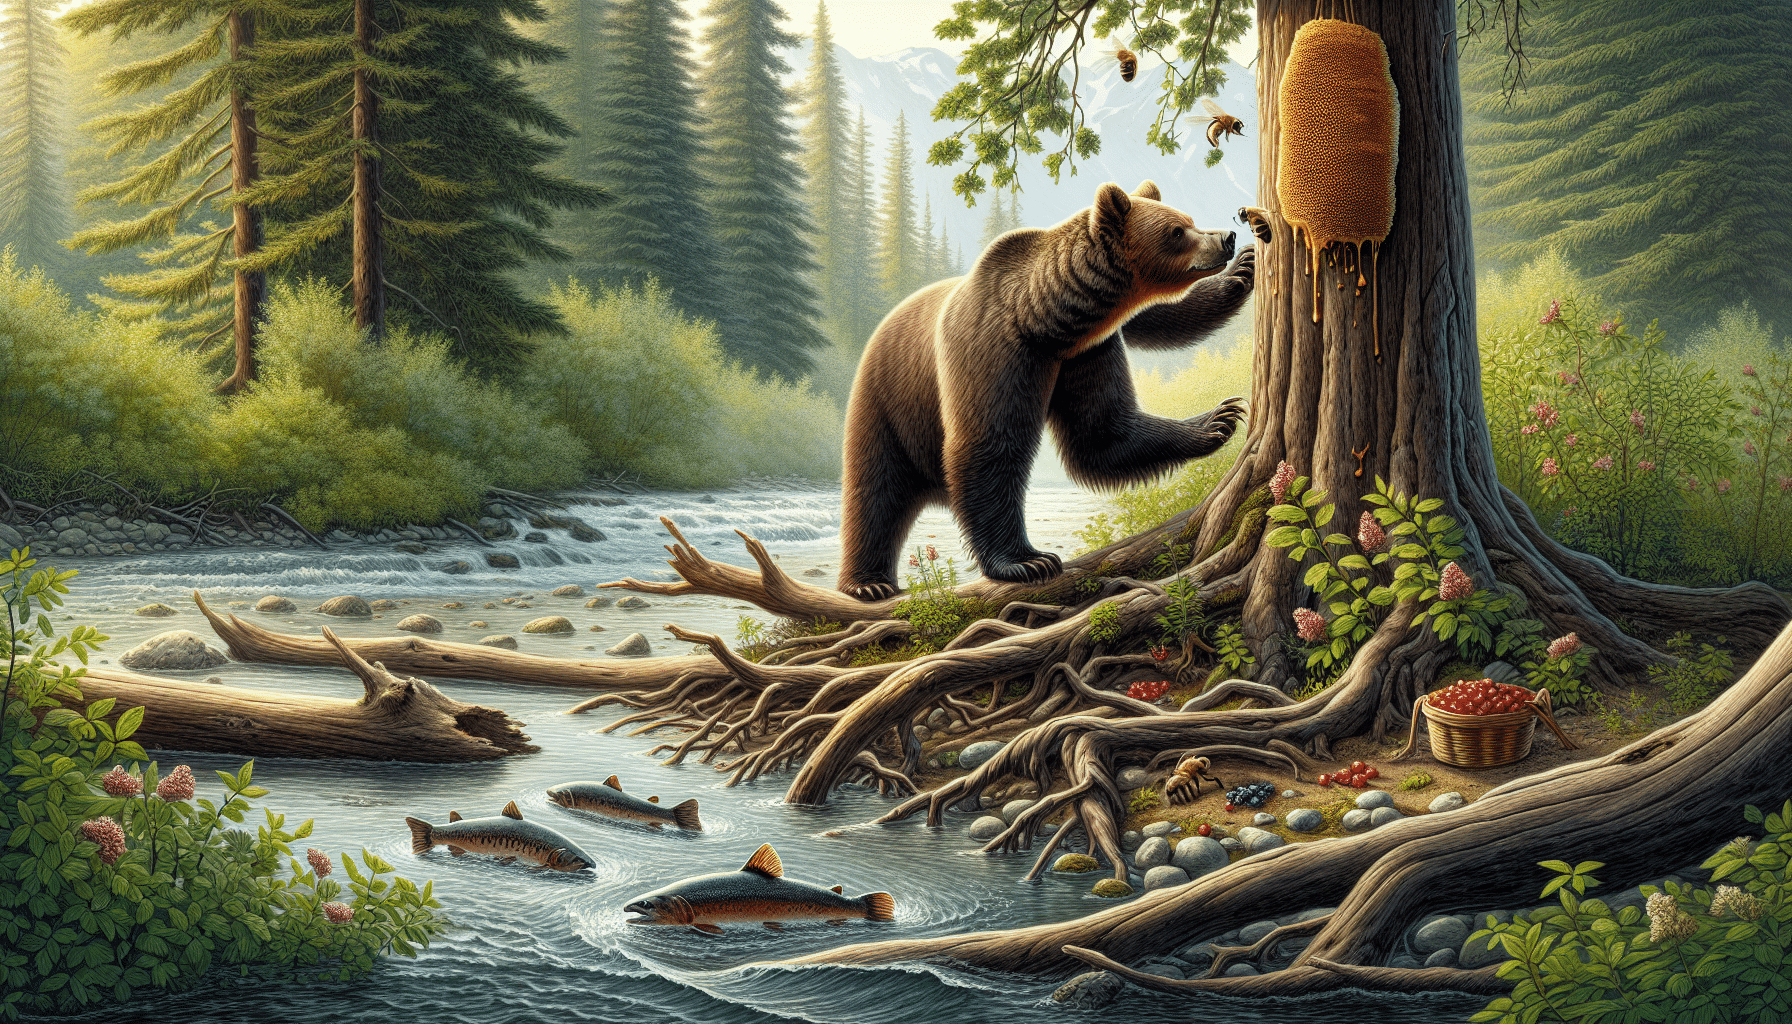 Create an educational and scientifically accurate depiction of a mature brown bear in its natural habitat. Highlight it foraging in the woods, its paws reaching for a beehive hanging from a tree. Nearby, show some salmon swimming upstream in a river. Scatter some berries and roots around to further showcase its omnivorous diet. Please ensure no human figures, text, brand logos, or identifiable brand items are included in the scene.